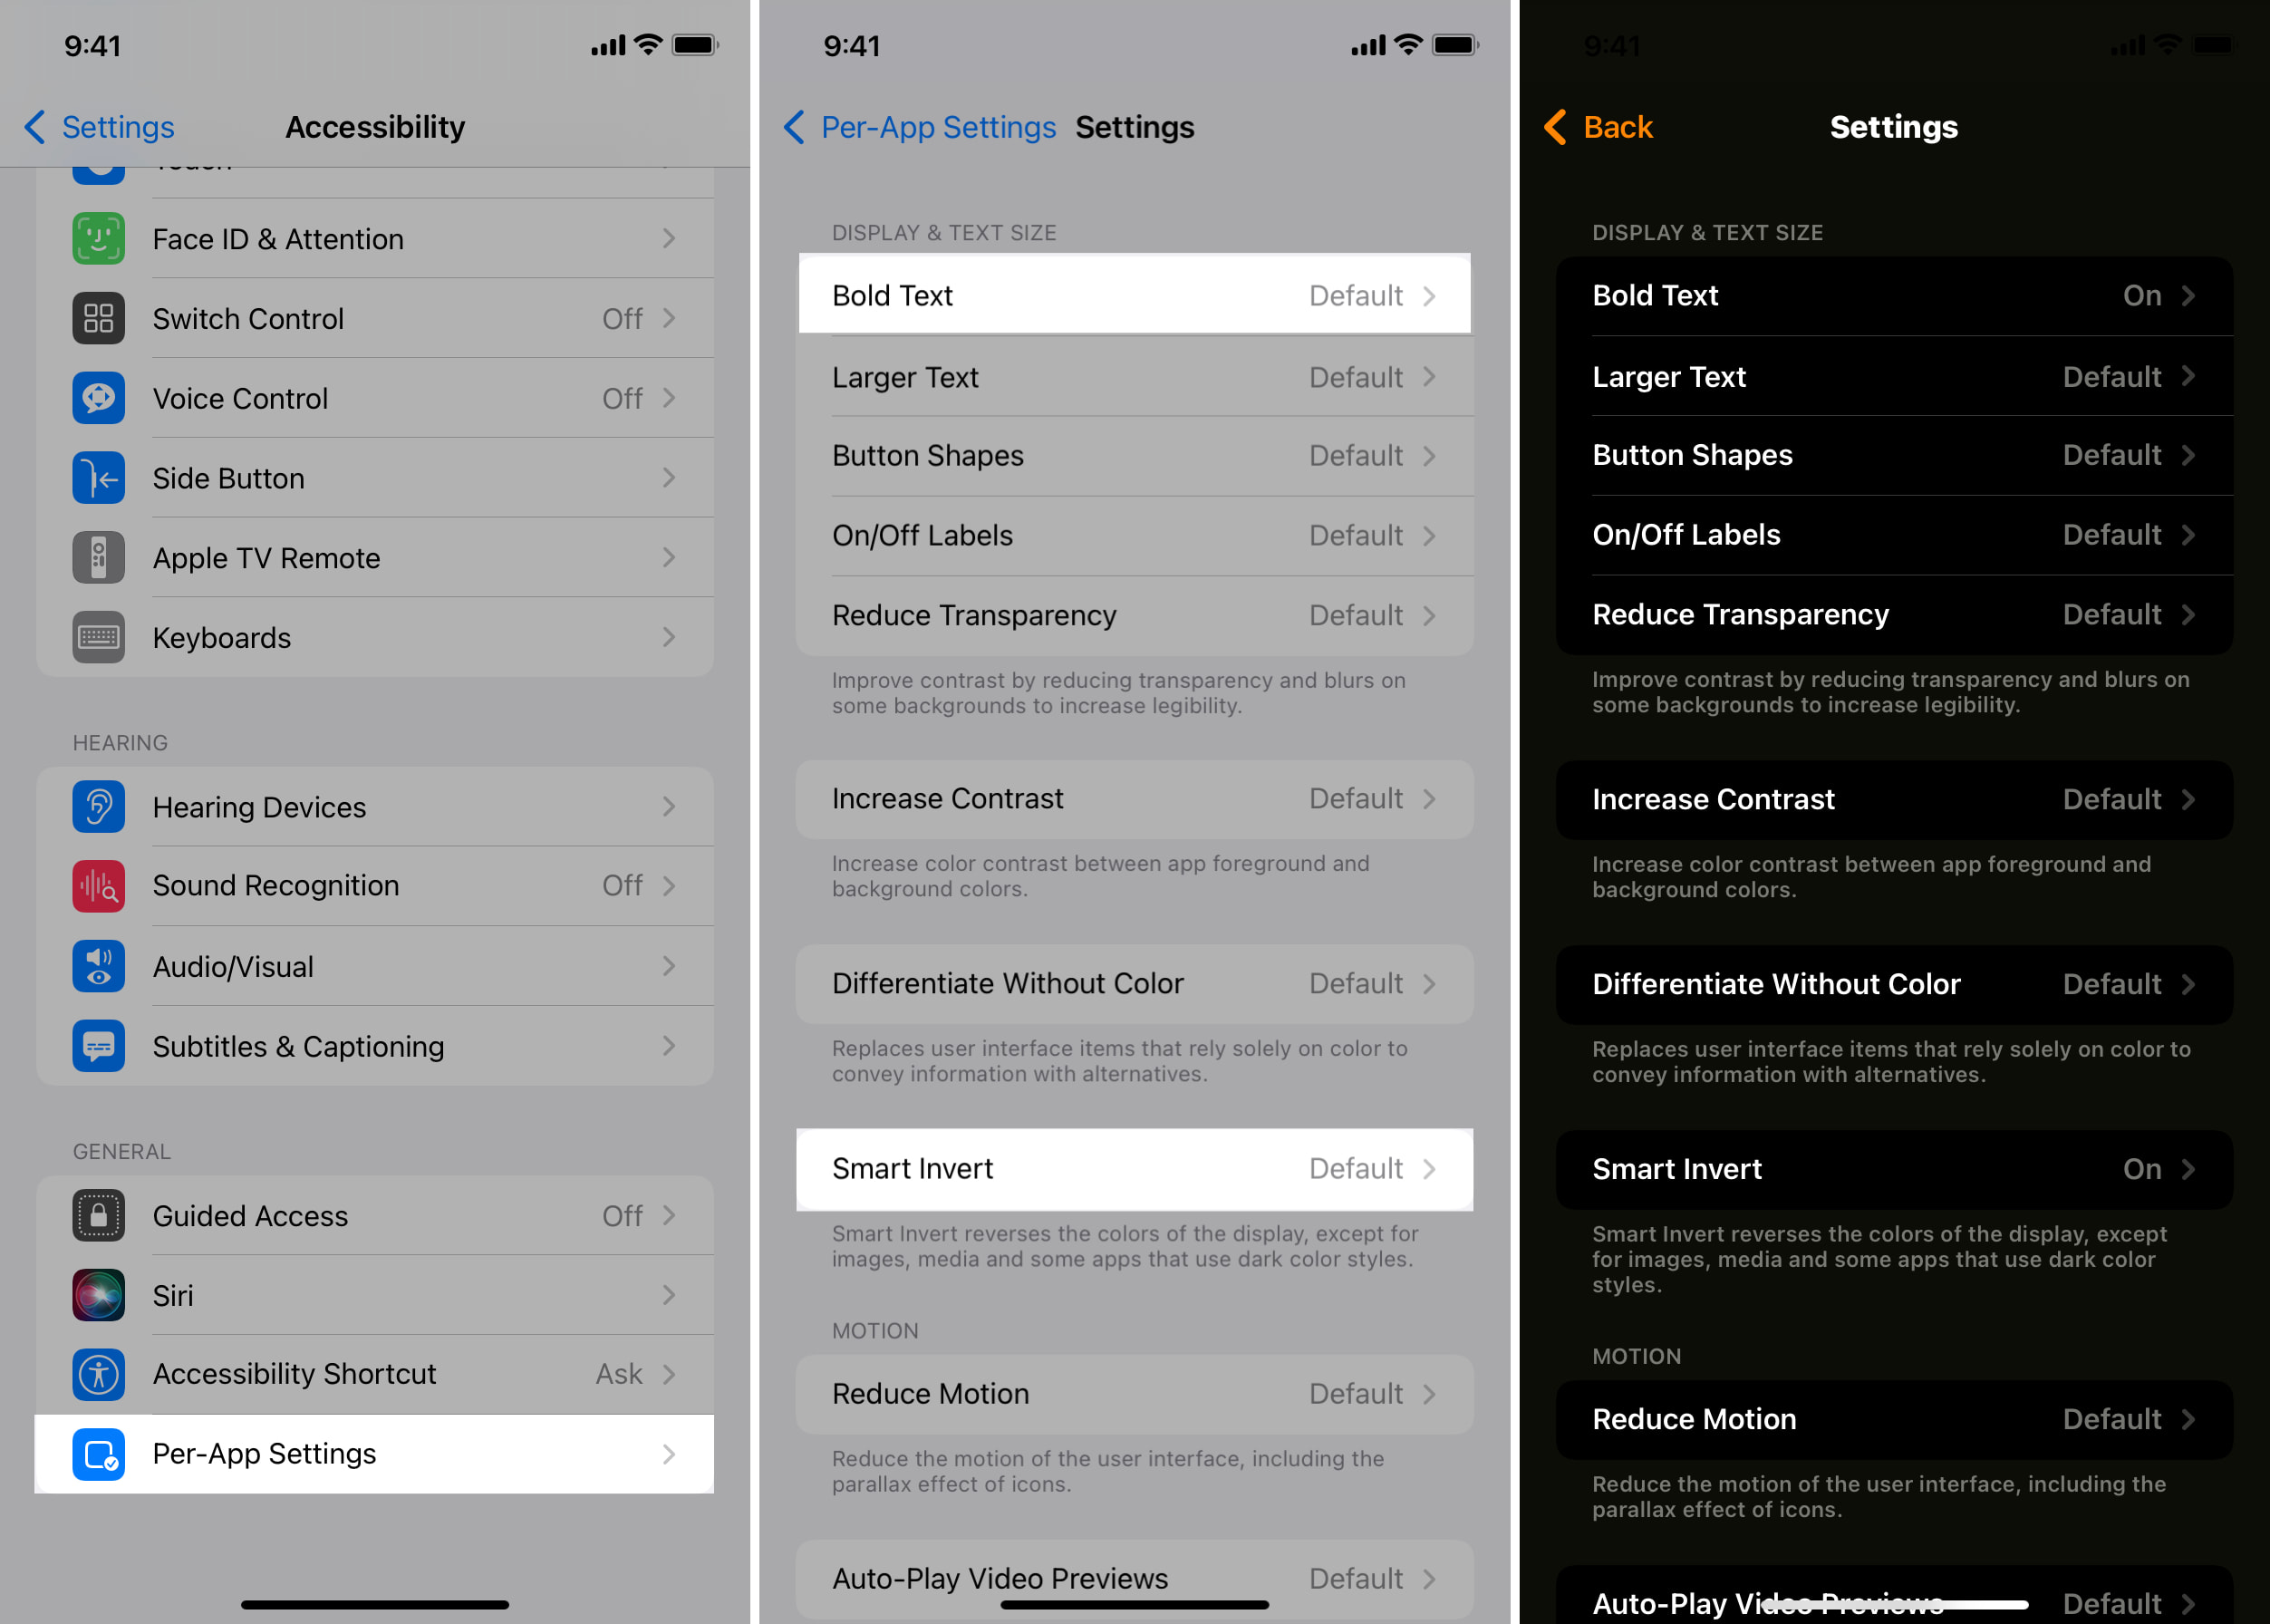 How to use Per-App Settings on iPhone